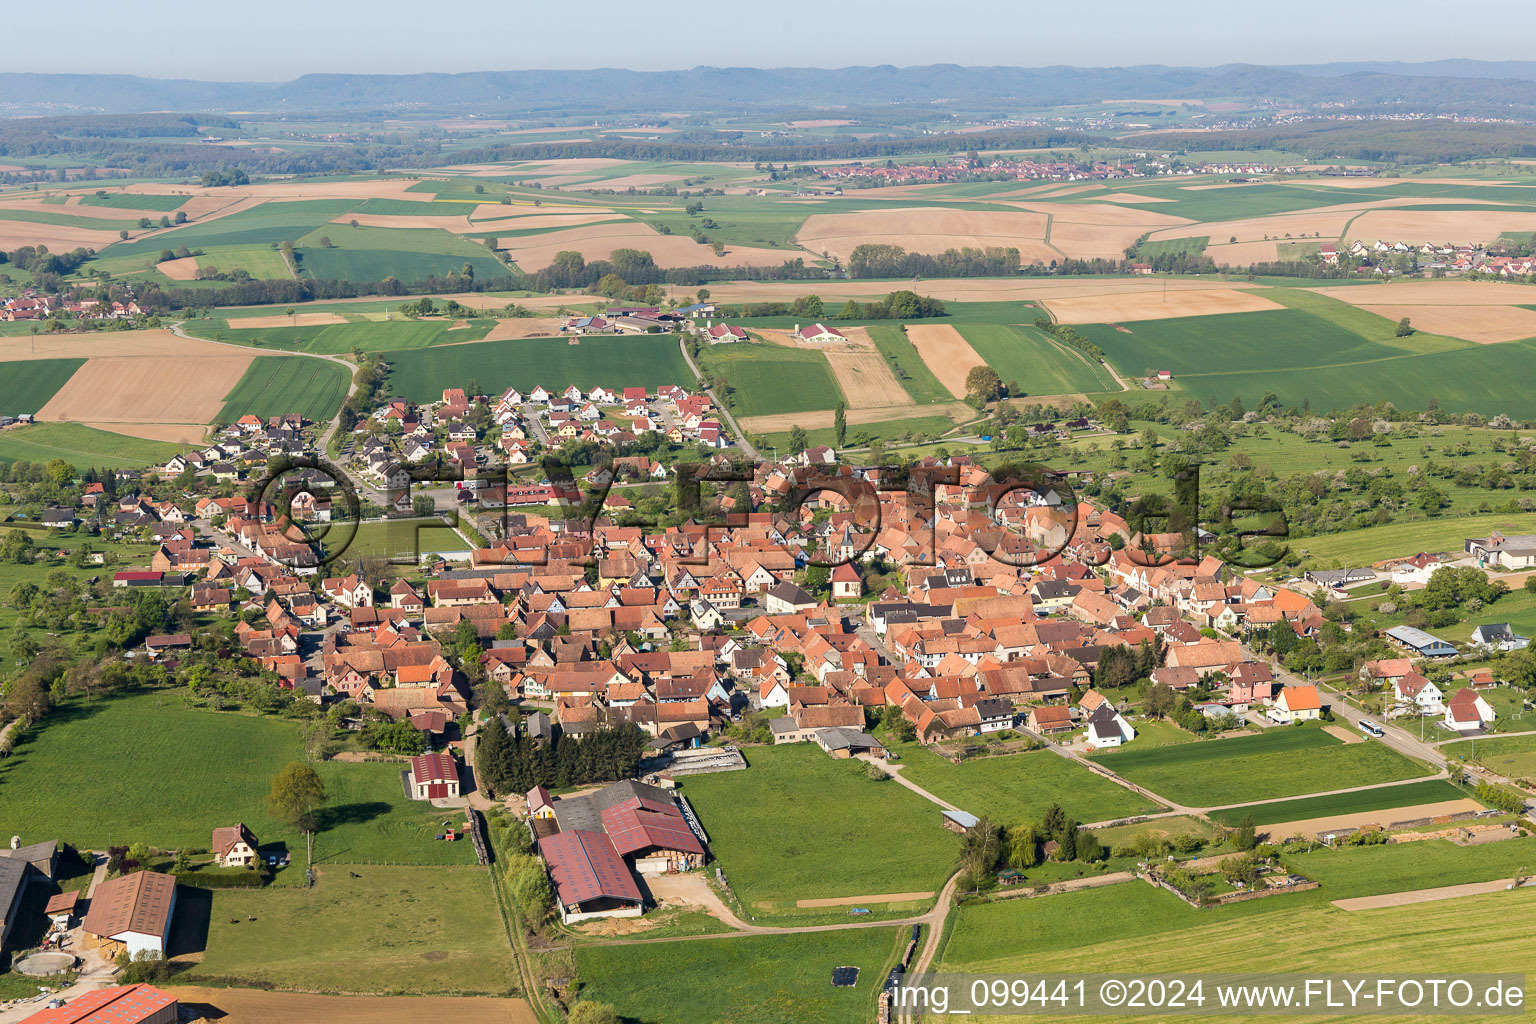 Aerial view of Village - view on the edge of agricultural fields and farmland in Uhrwiller in Grand Est, France